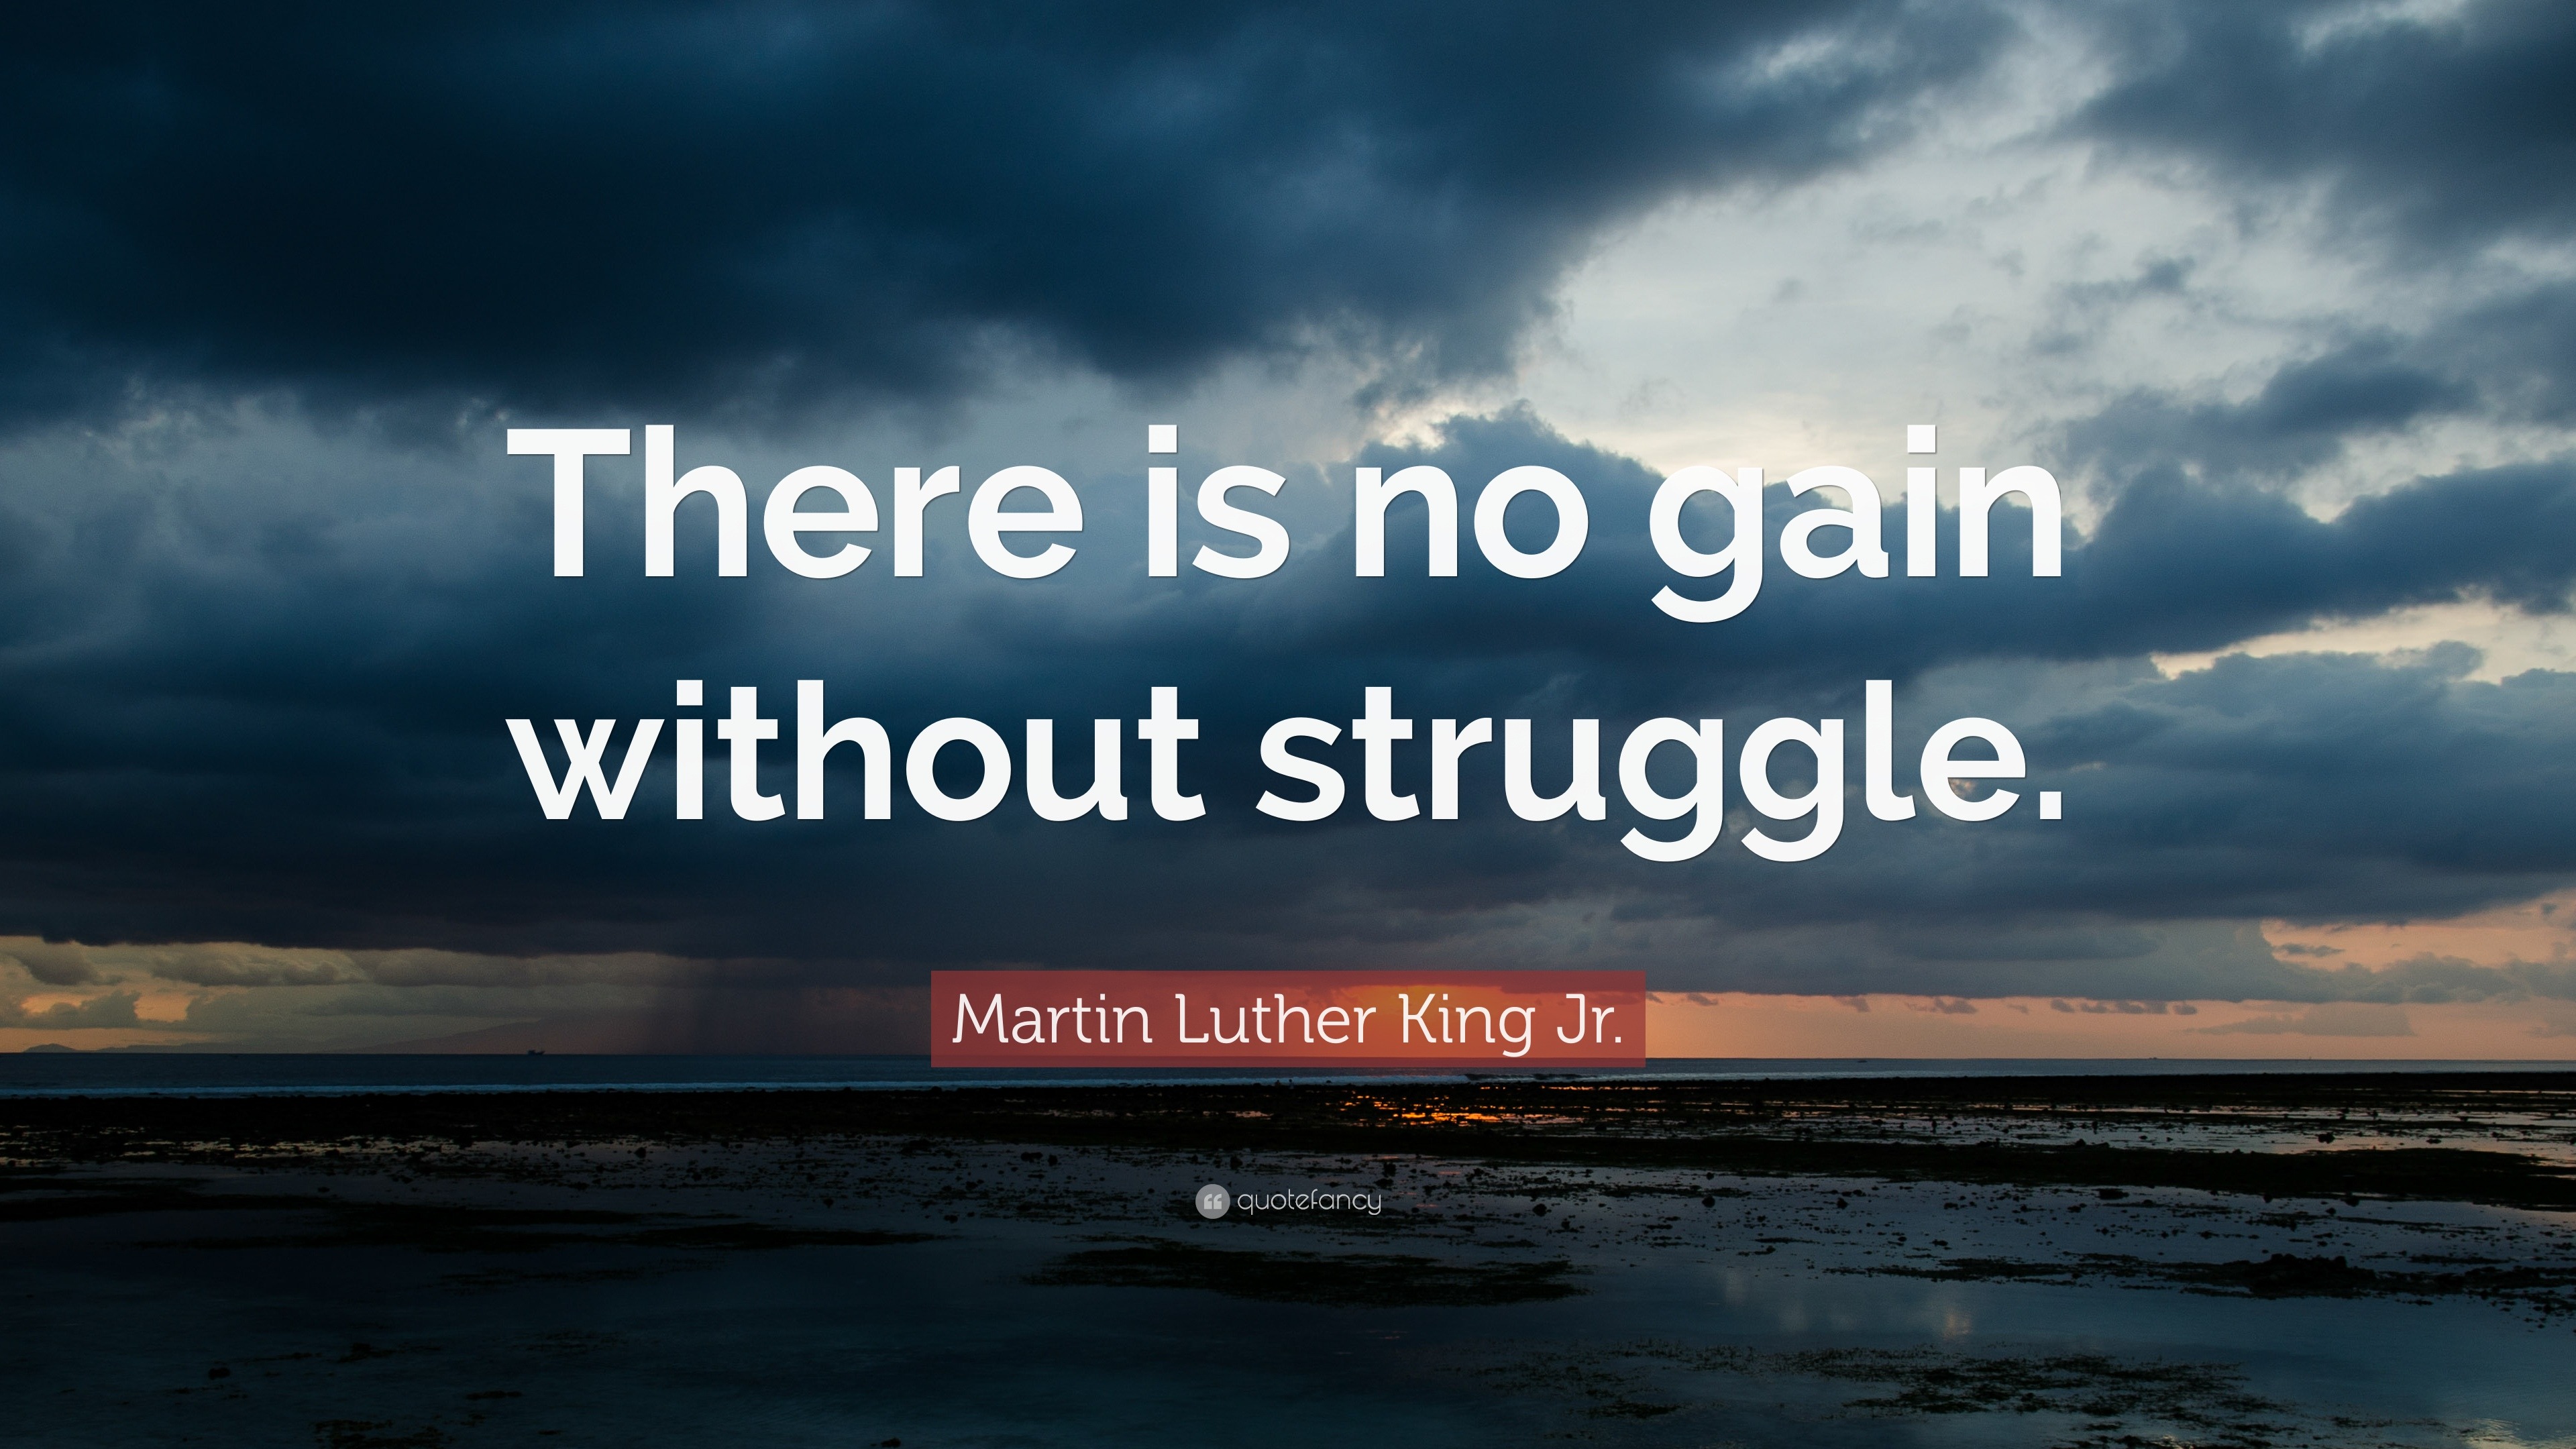 Martin Luther King Jr. Quote: “There is no gain without struggle.” (22